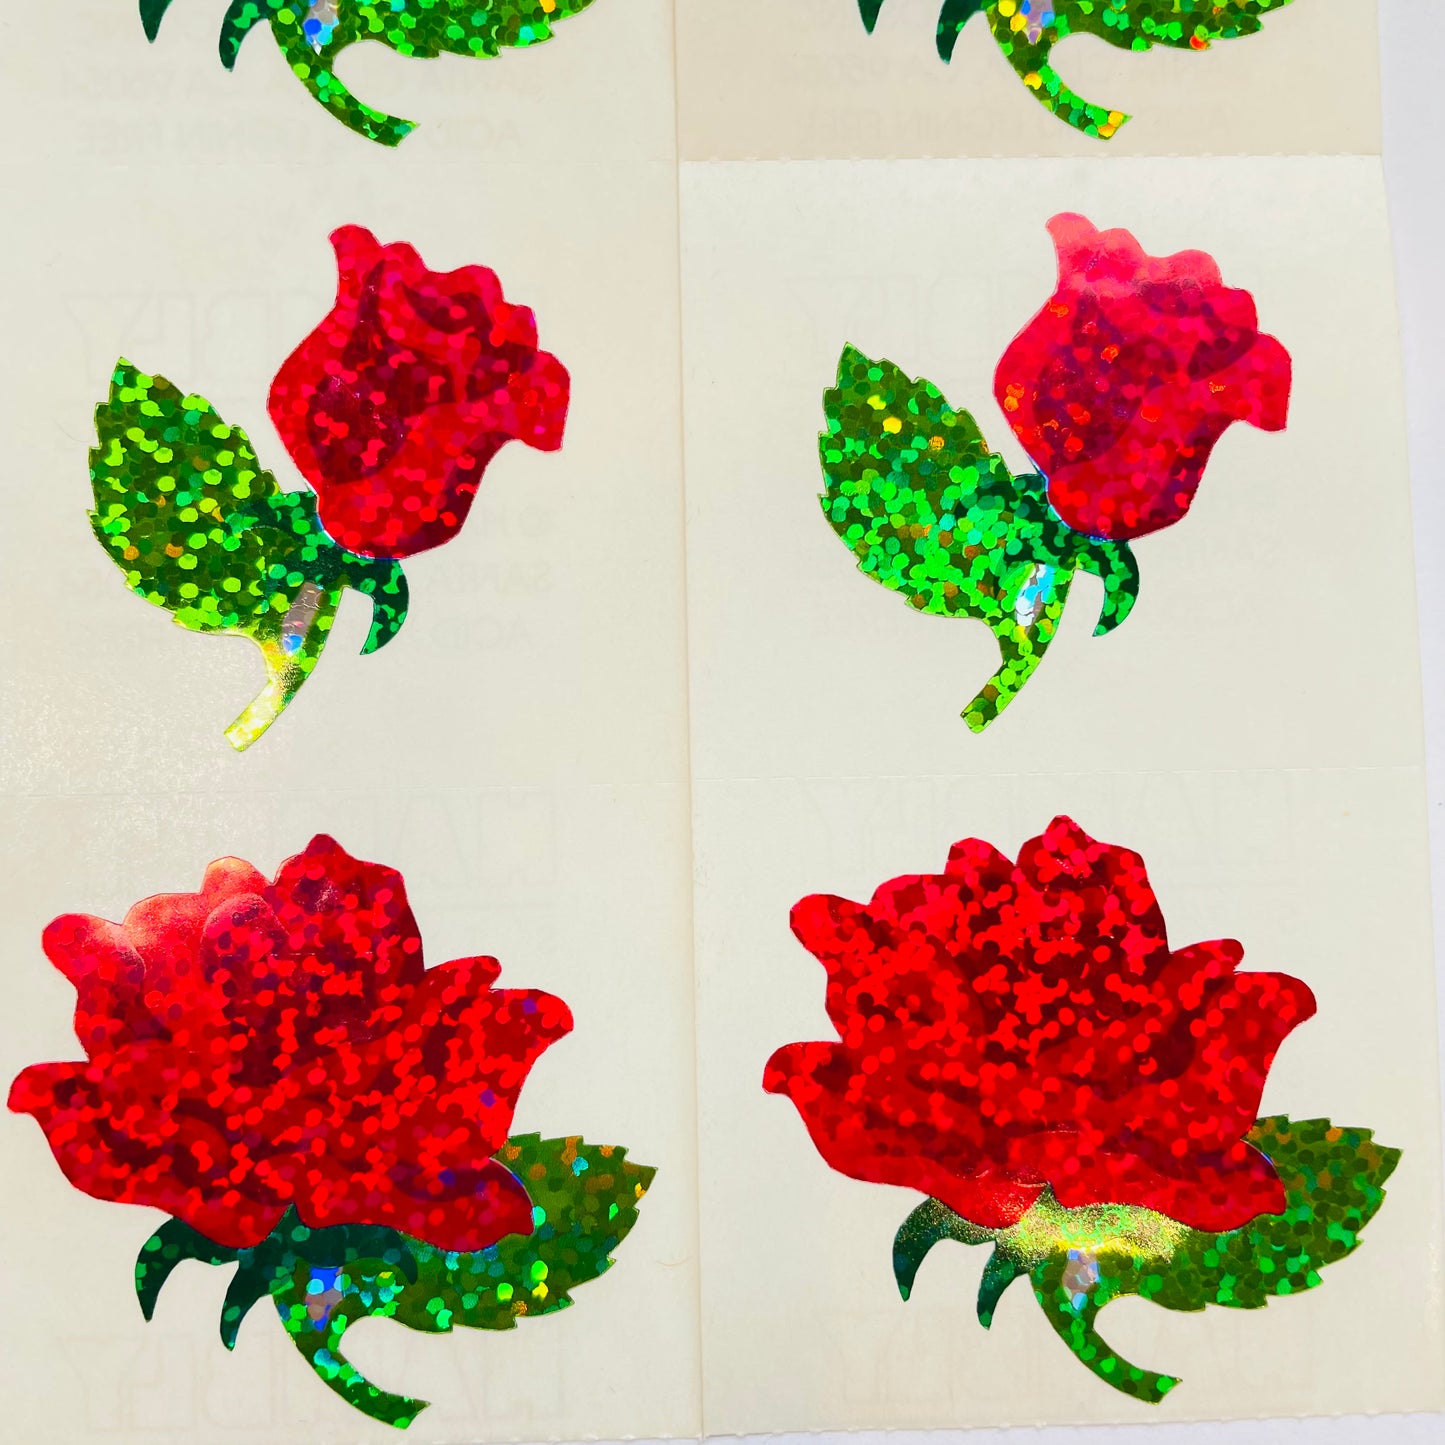 HAMBLY: Red Rose Glitter Stickers - 4 pcs